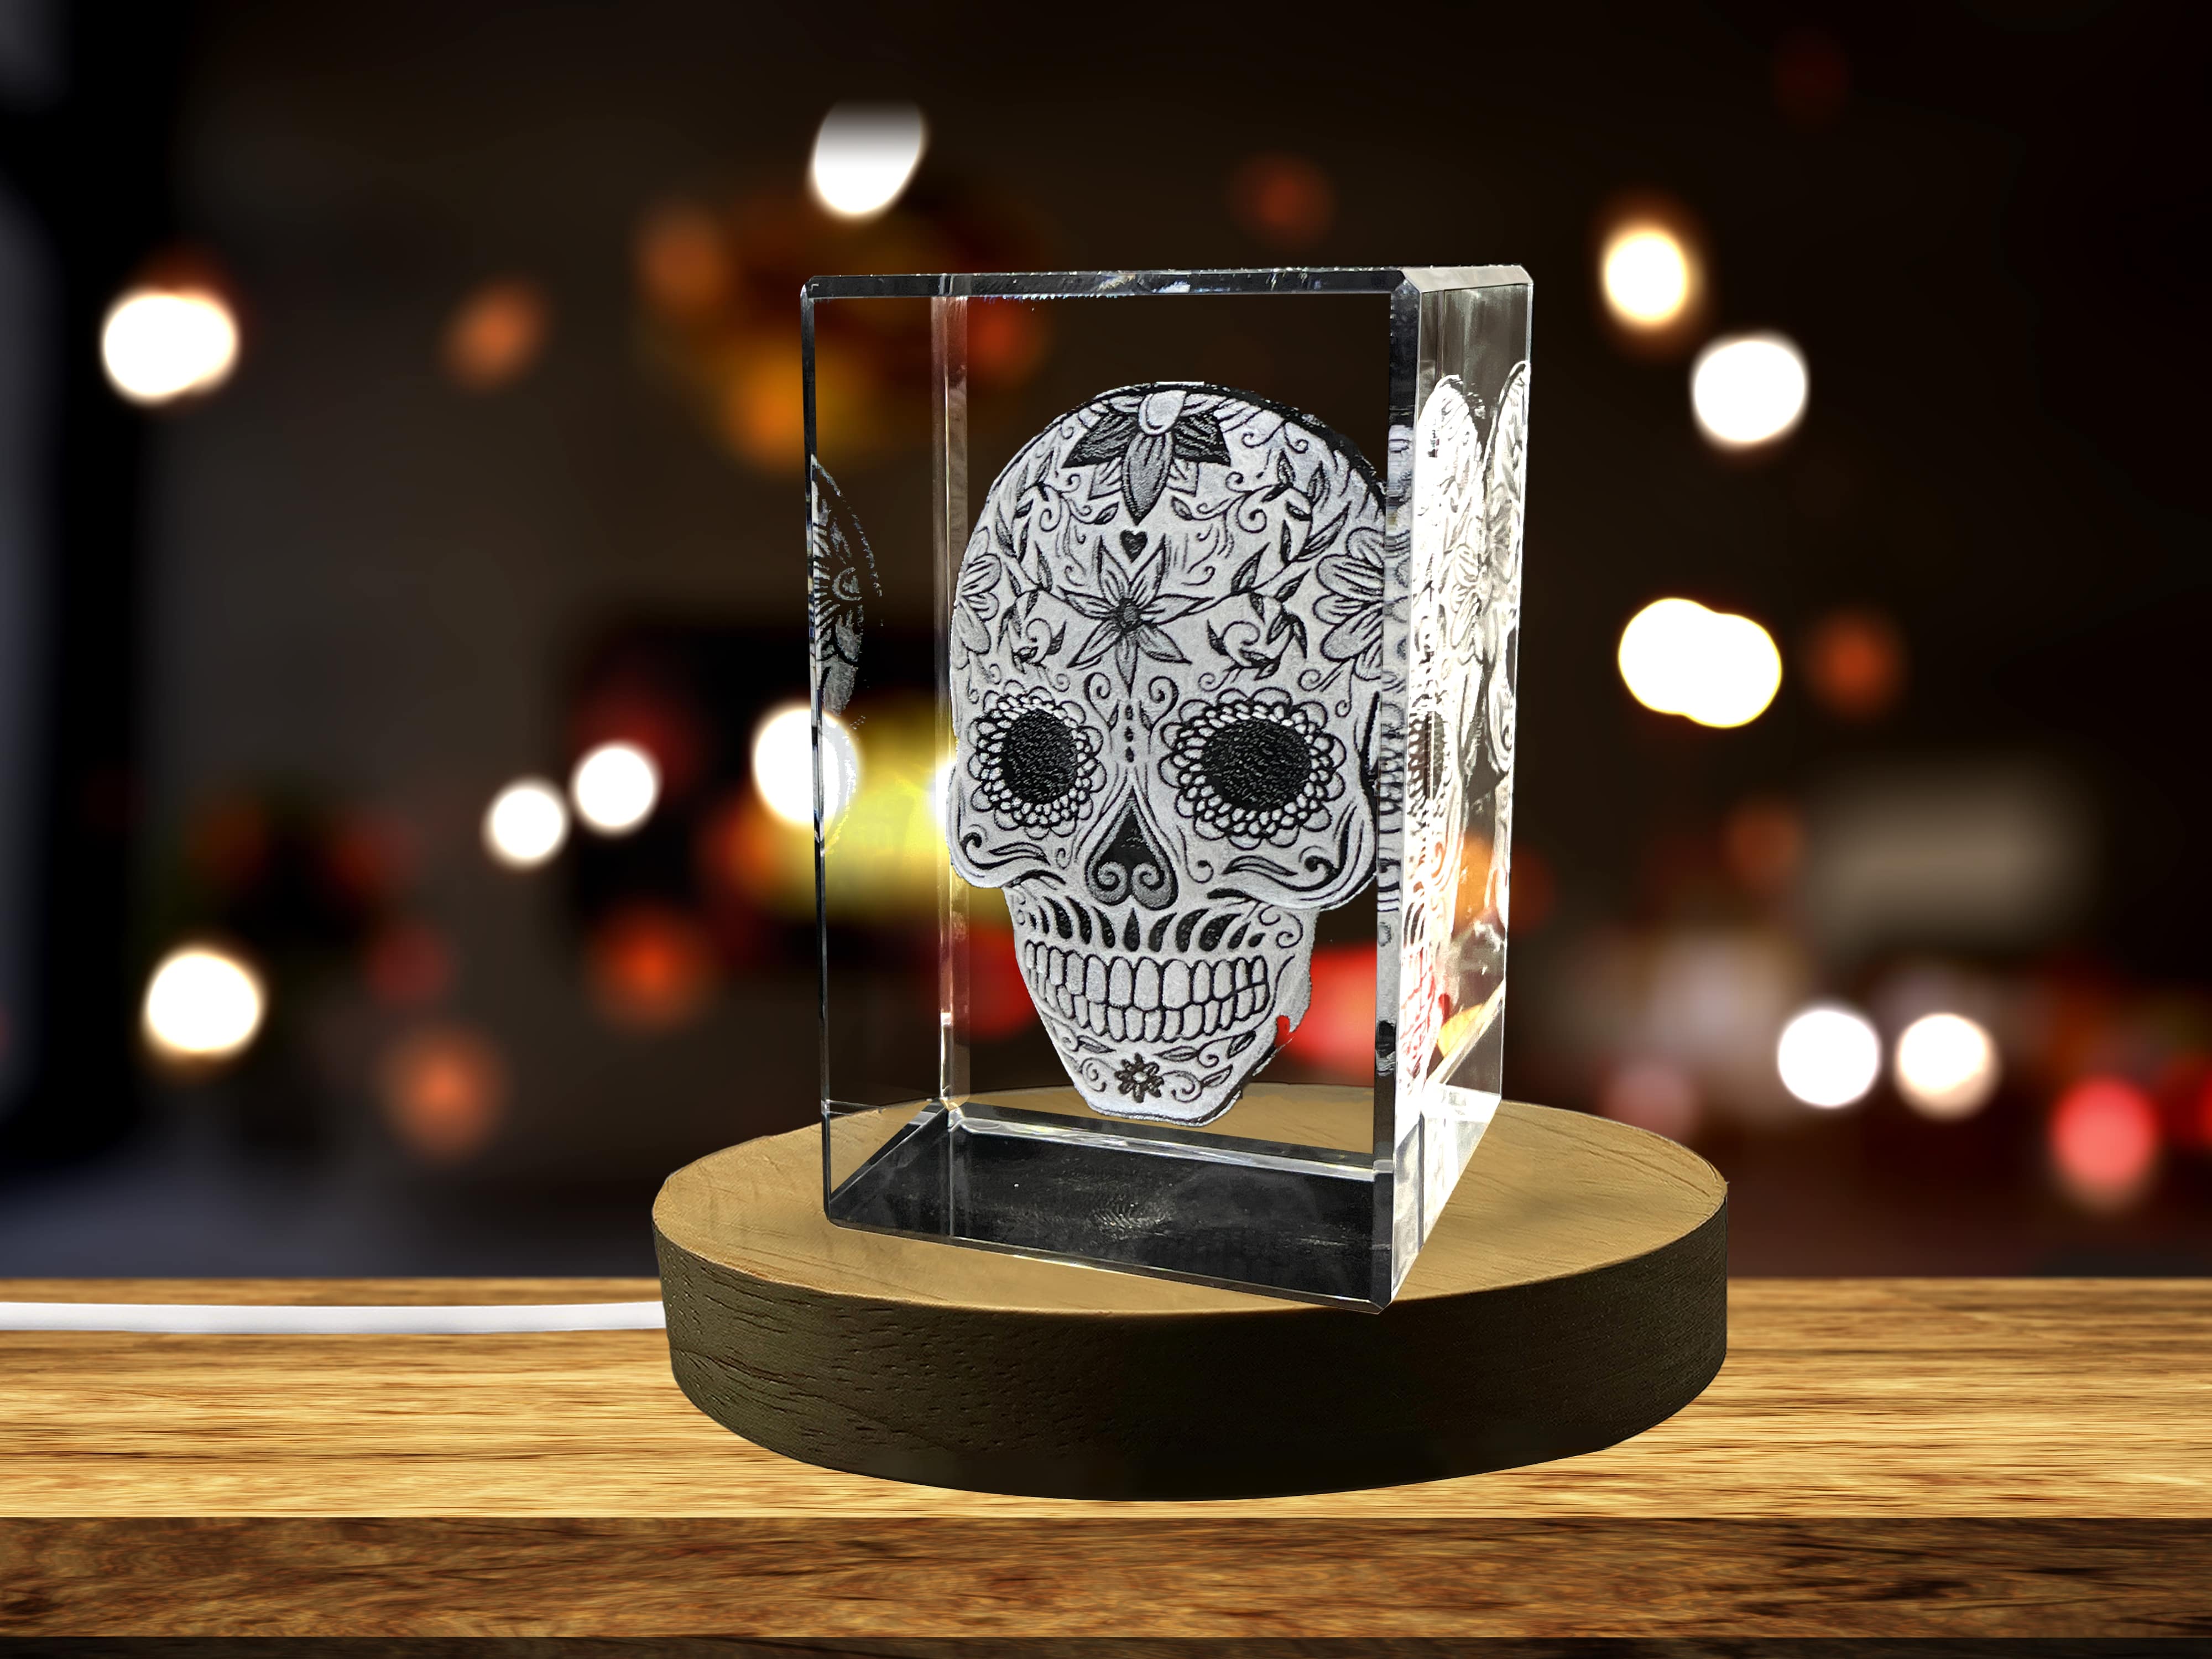 Mexican Skull 3D Engraved Crystal Decor A&B Crystal Collection